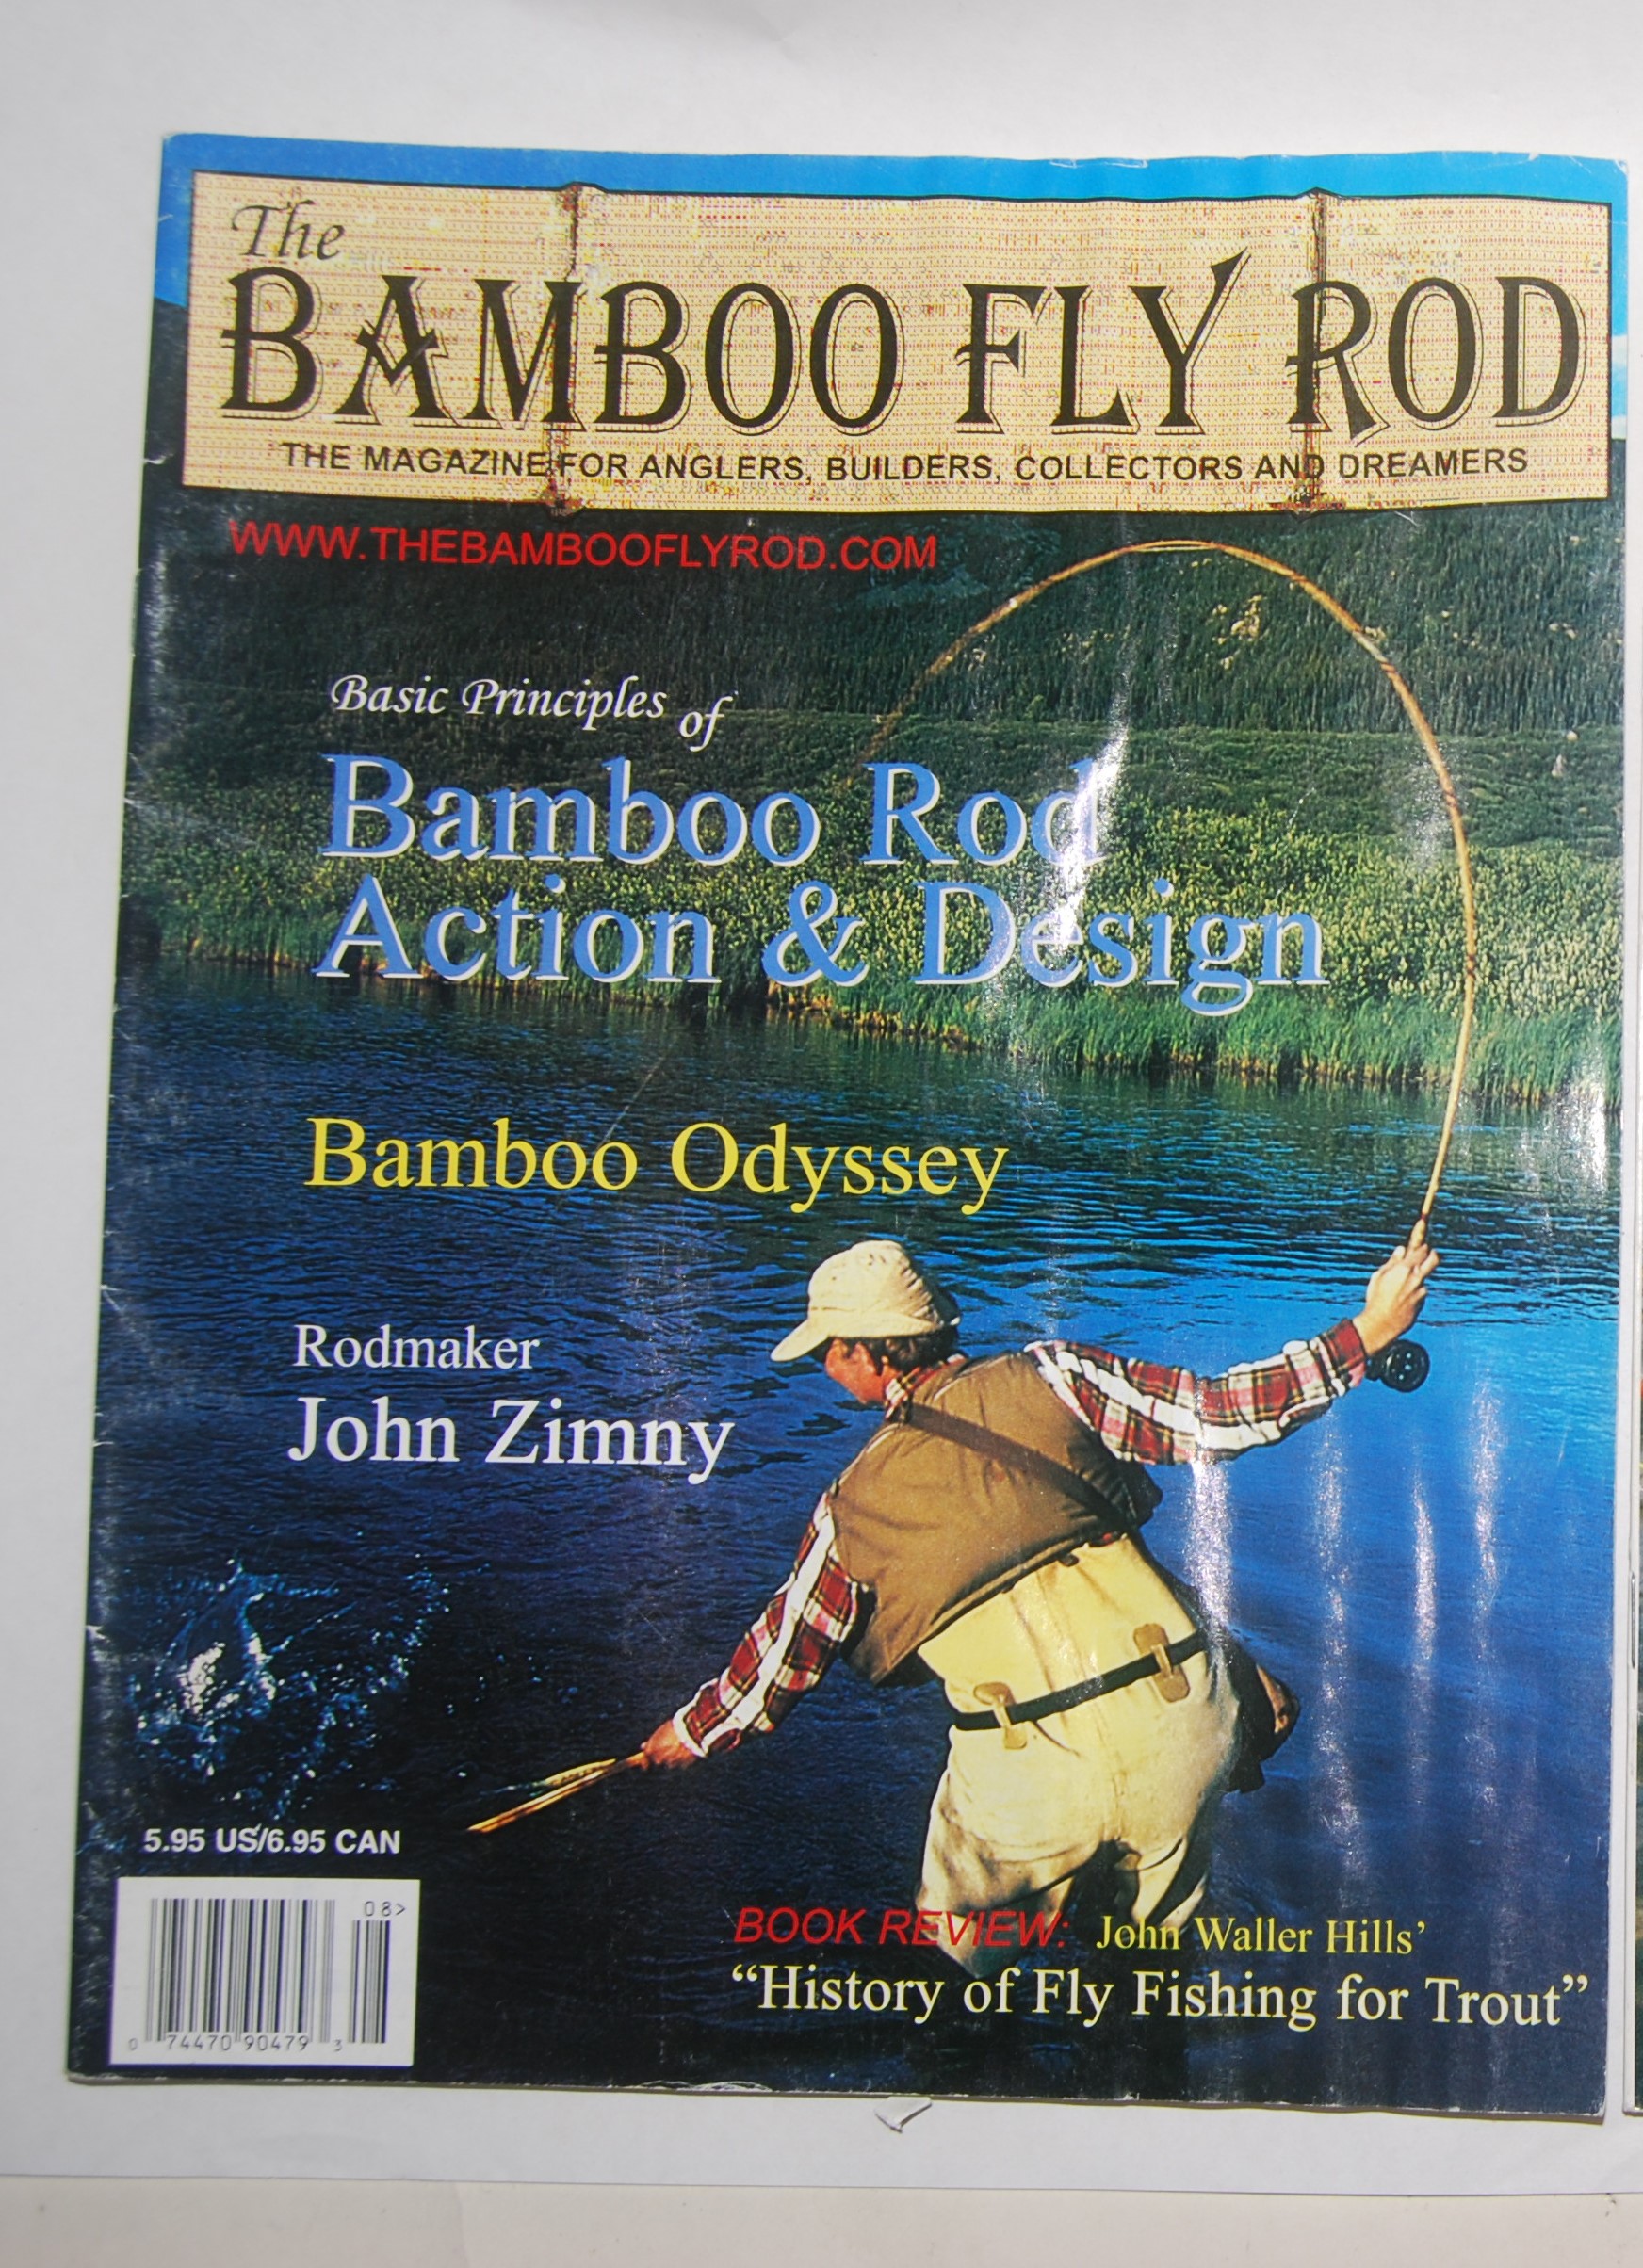 Brandin, Per. BASIC PRINCIPLES OFBAMBOO ROD ACTION & DESIGN. Bamboo Fly  Rod. Vol. 1 No. 4 July/August 1998. pp.4-7 & 42-43